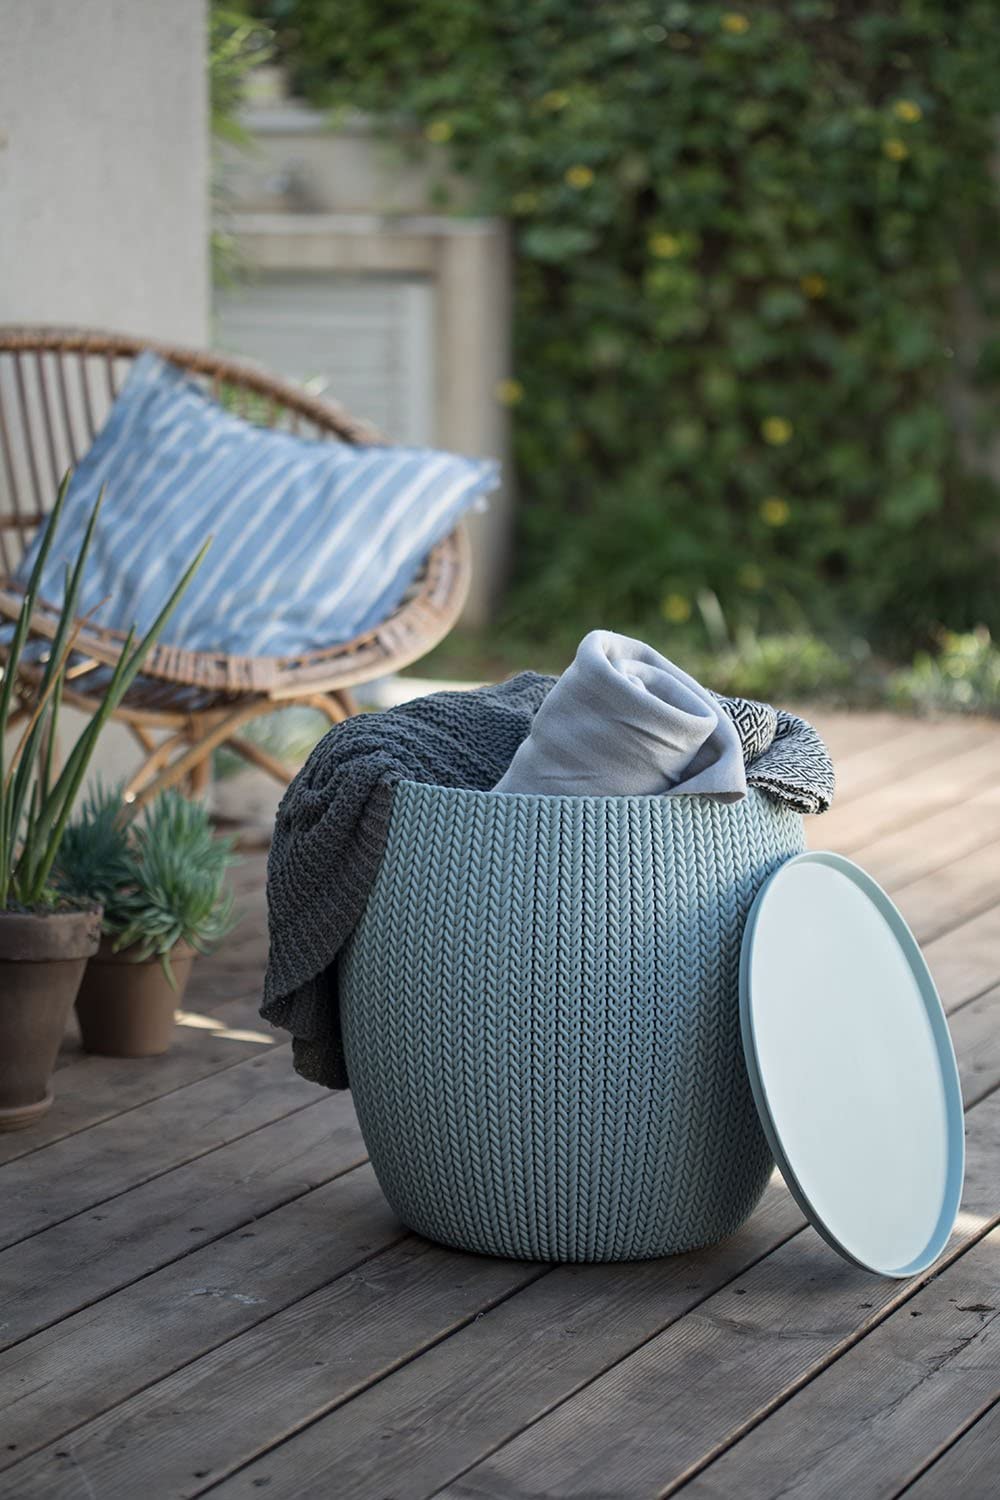 Keter Urban Knit 2 15 Unique Furniture Designs for Outdoor Small Spaces - 13